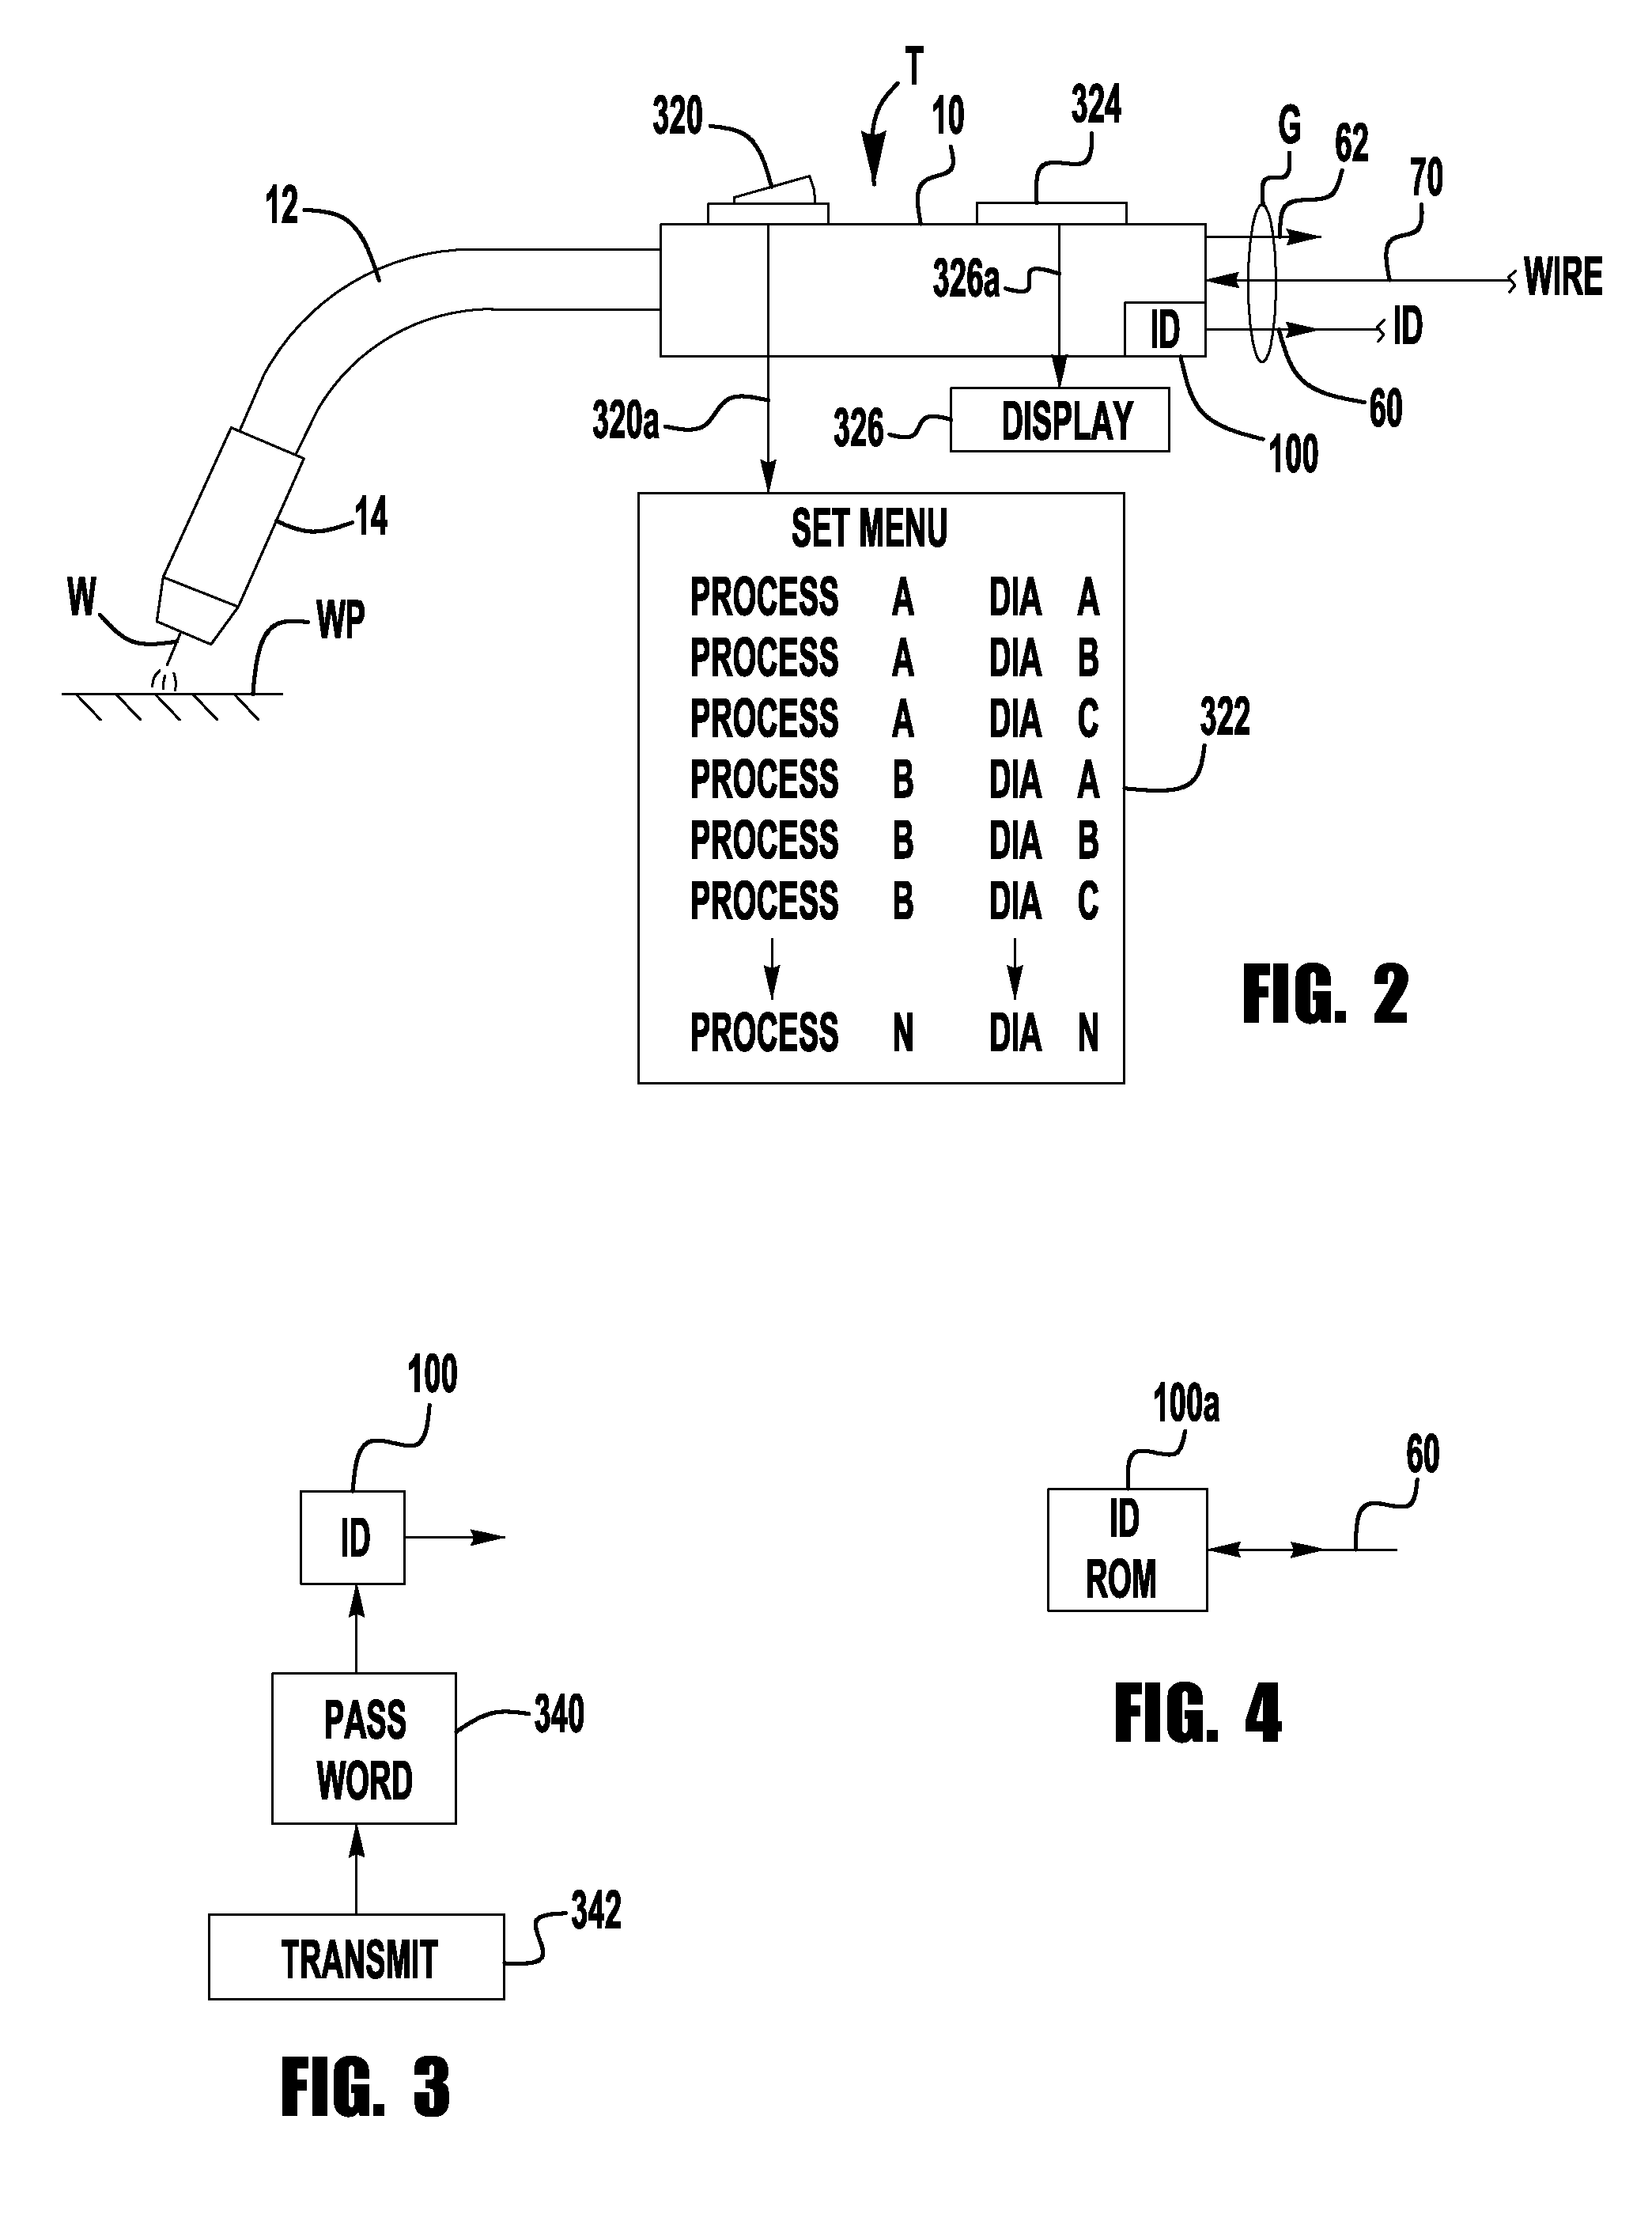 Torch for electric arc welding or plasma cutting system